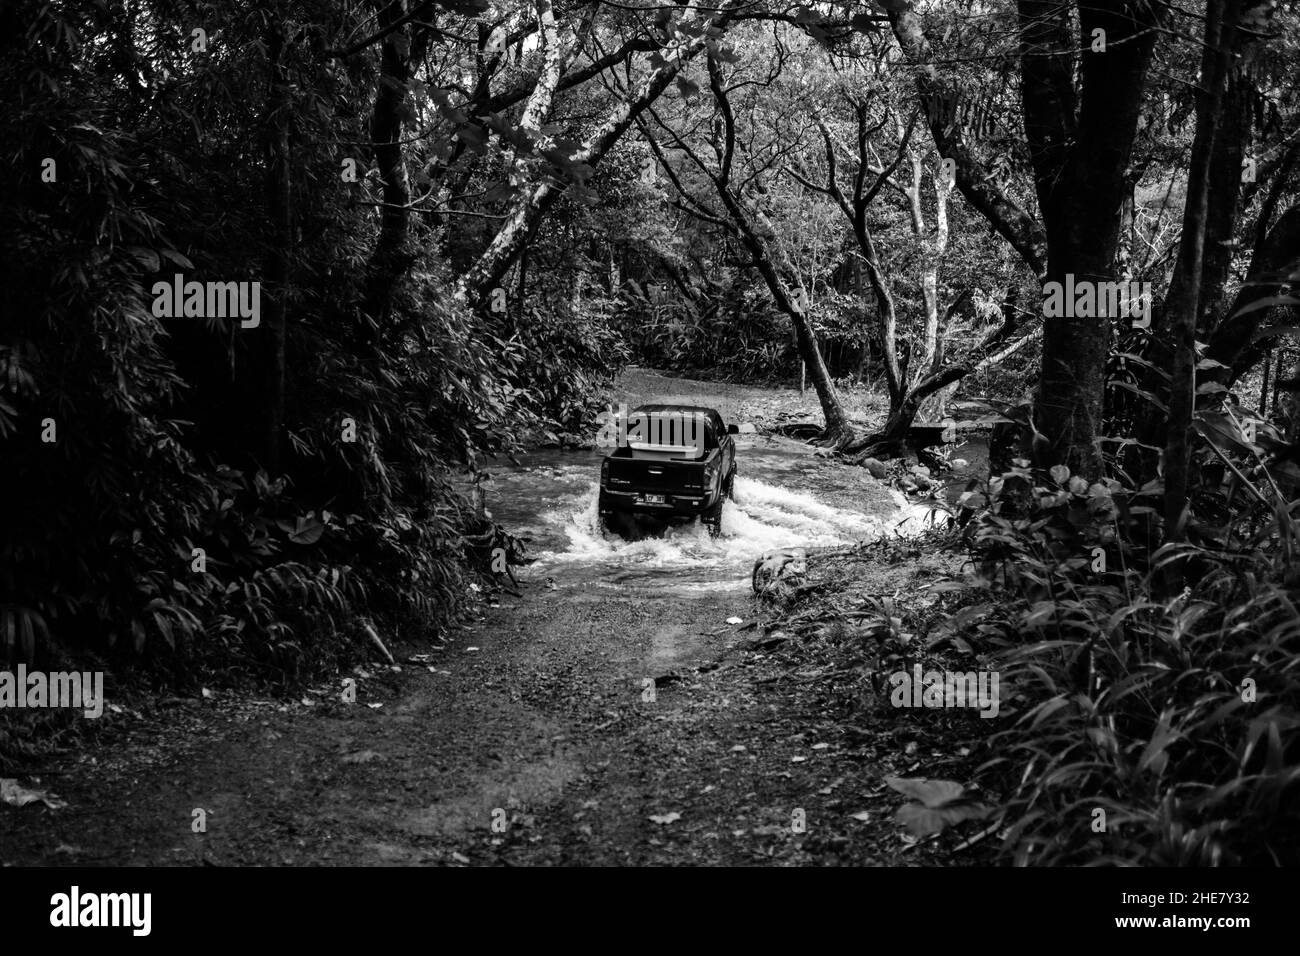 Damaged old car parked in a forest in Capetown, South Africa Stock Photo